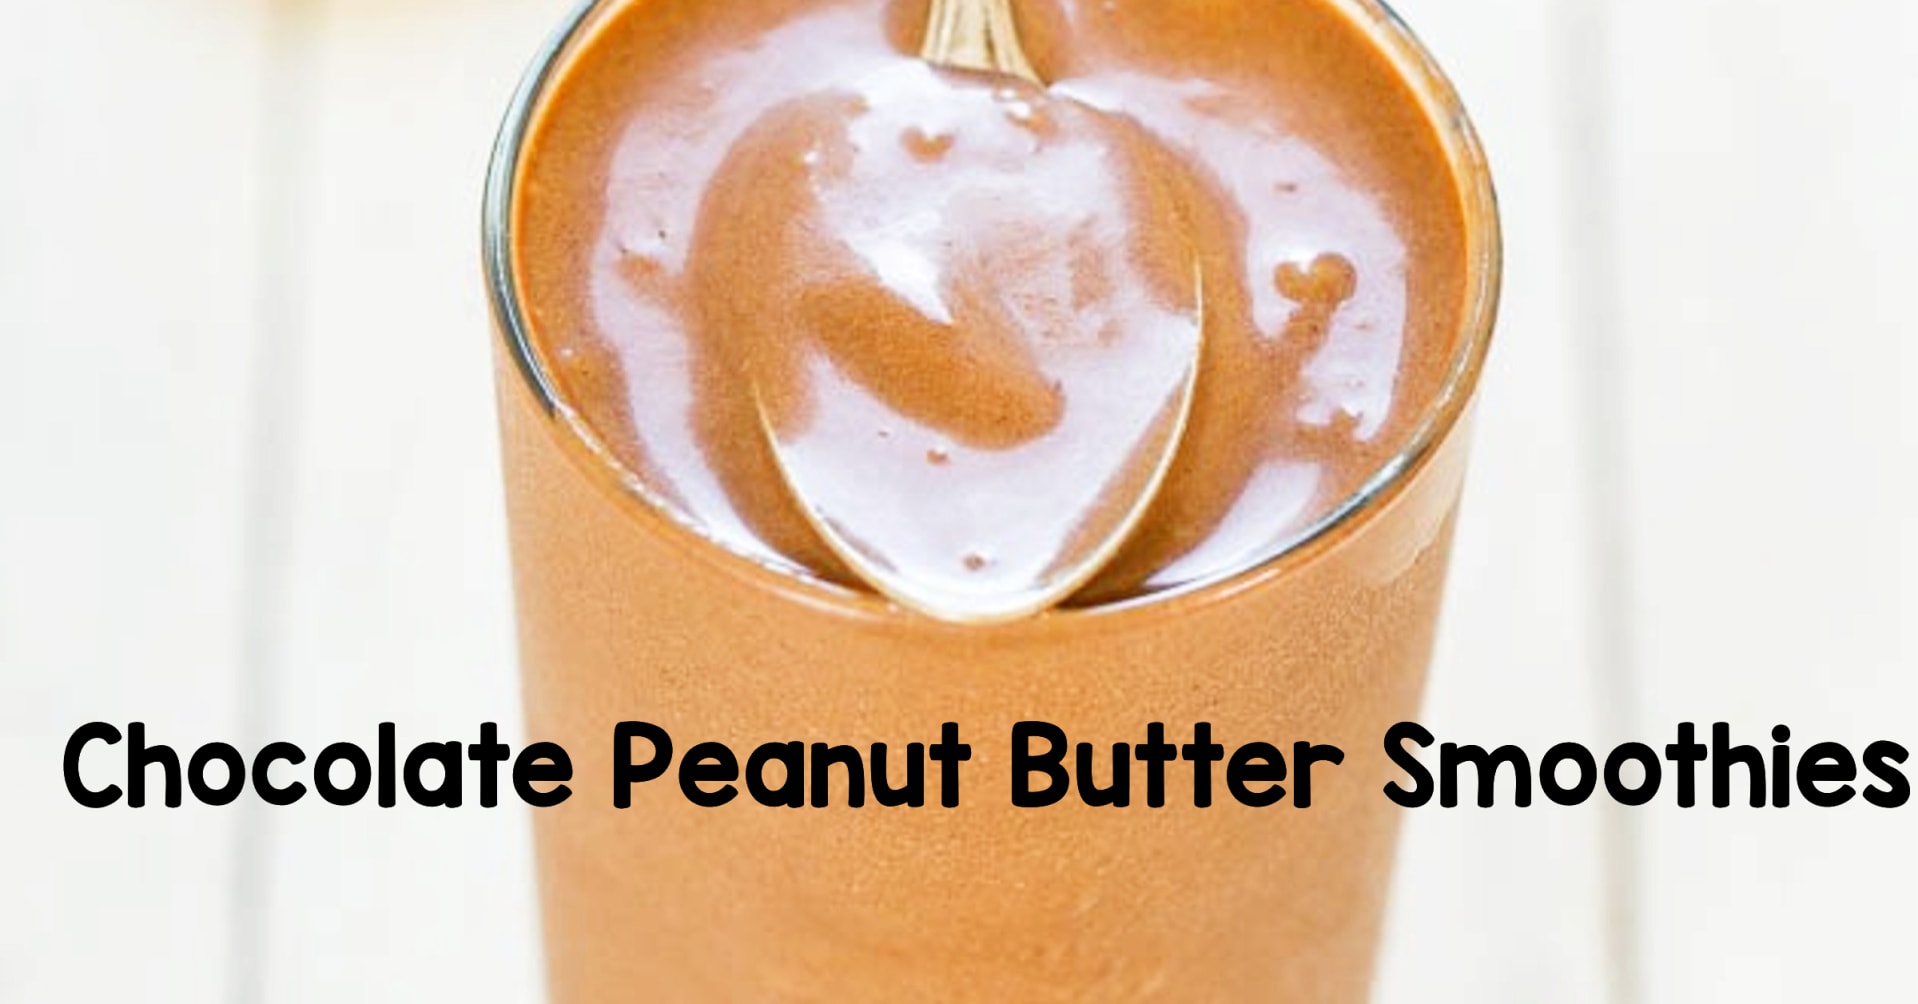 Healthy smoothie recipes - easy chocolate peanut butter smoothie recipes